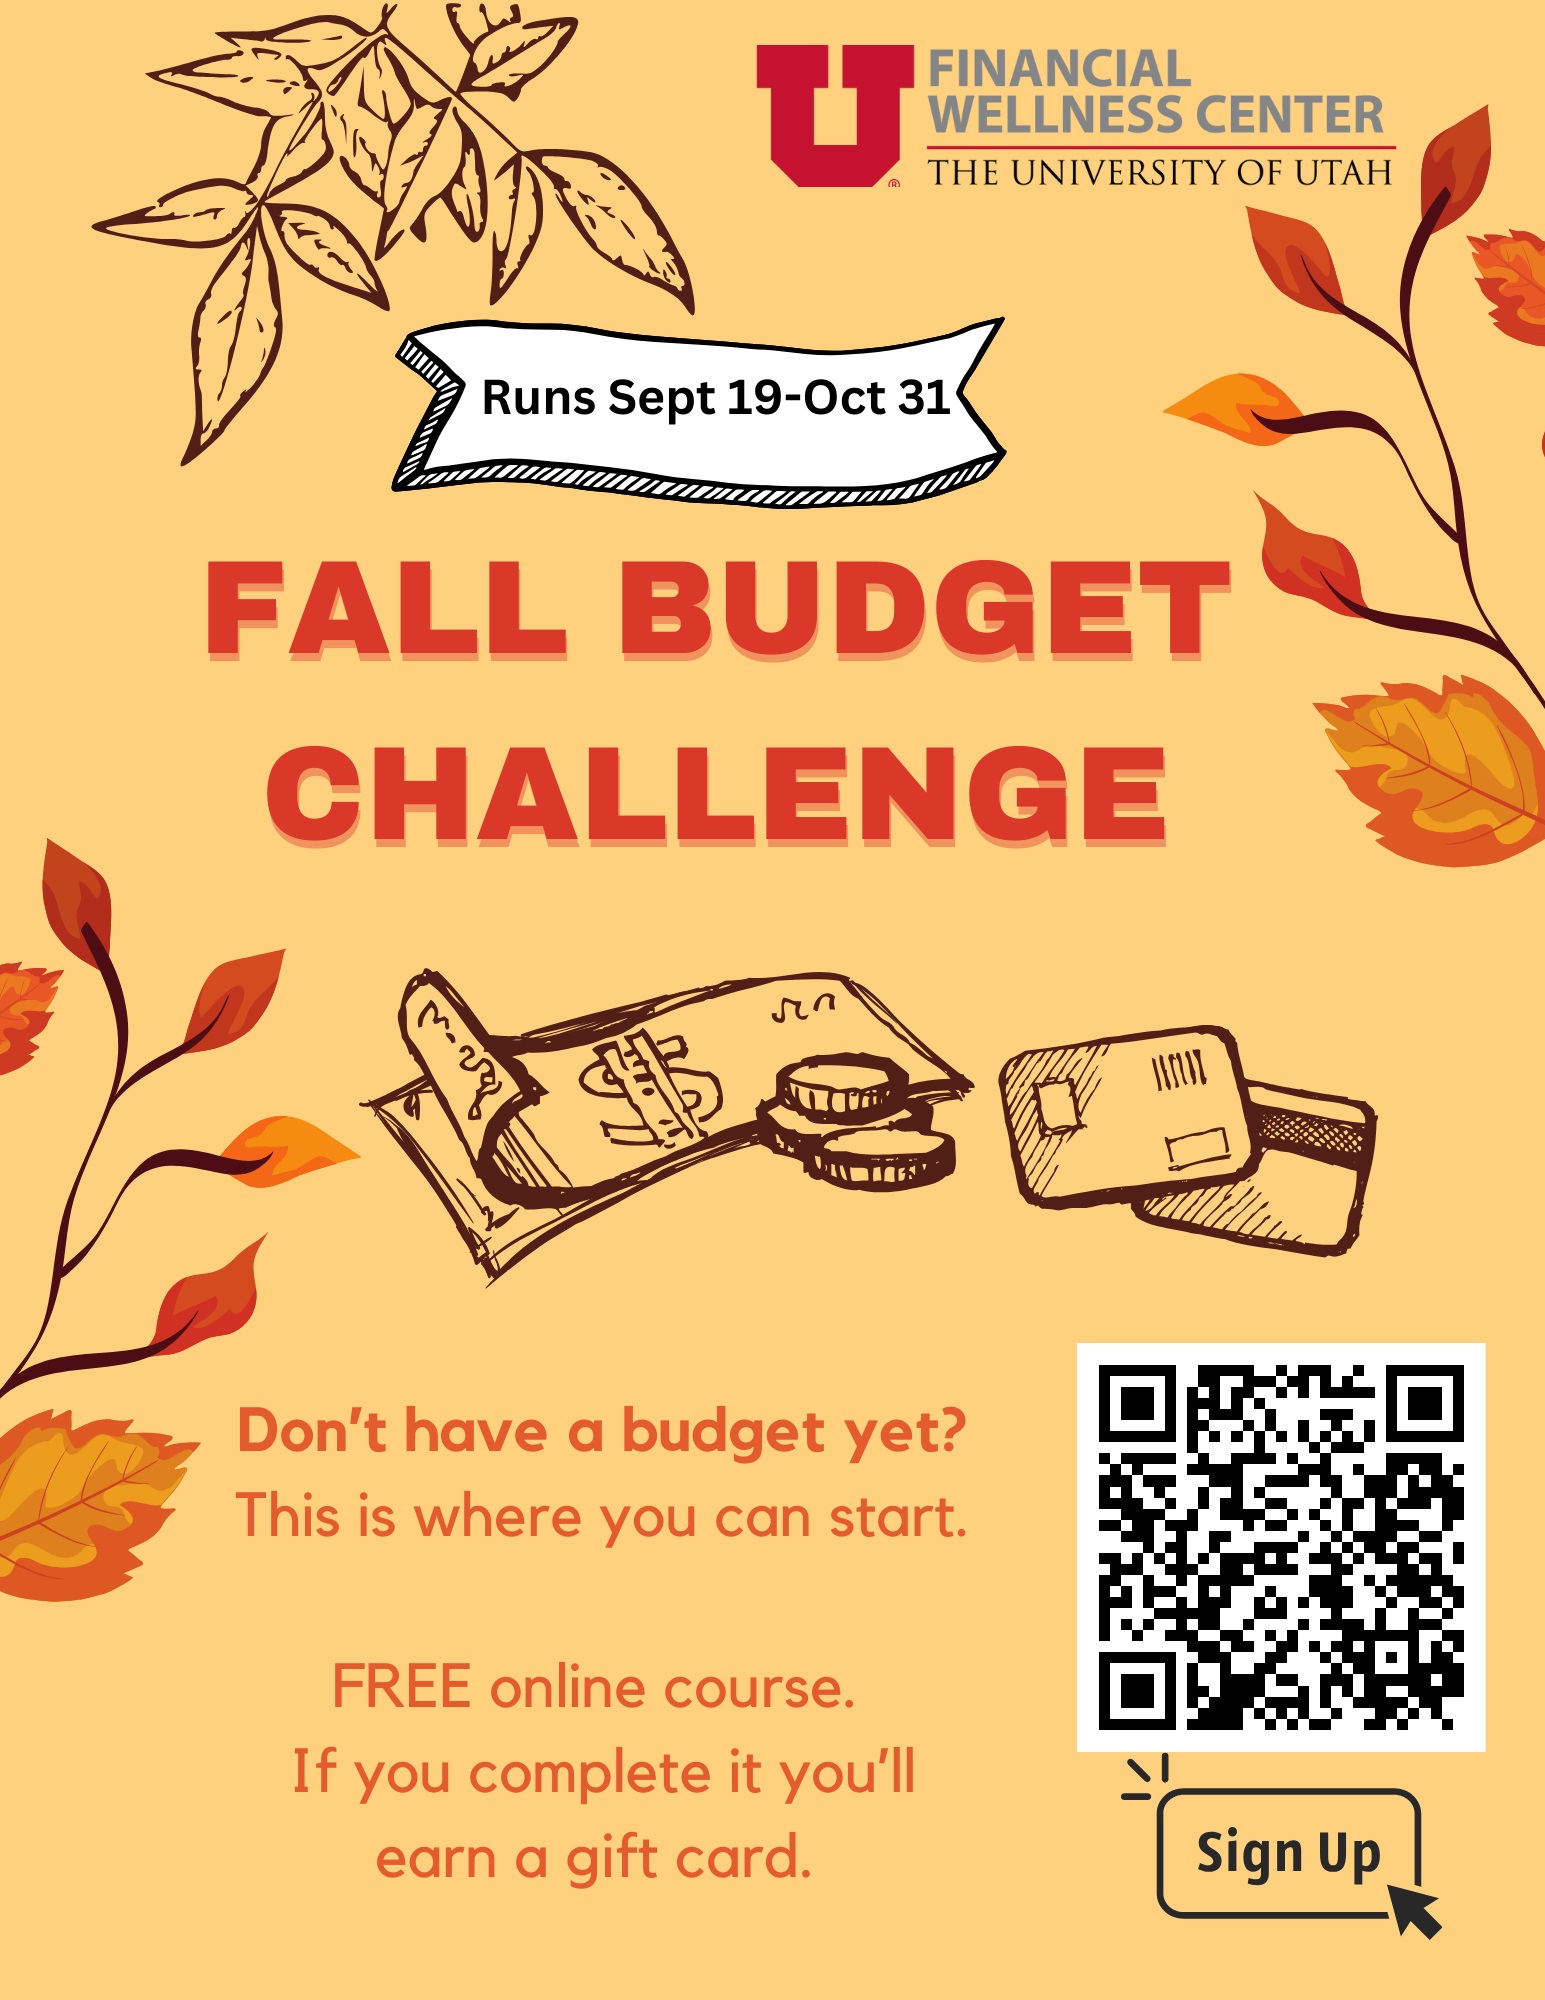 fall semester budget challenge is starting up